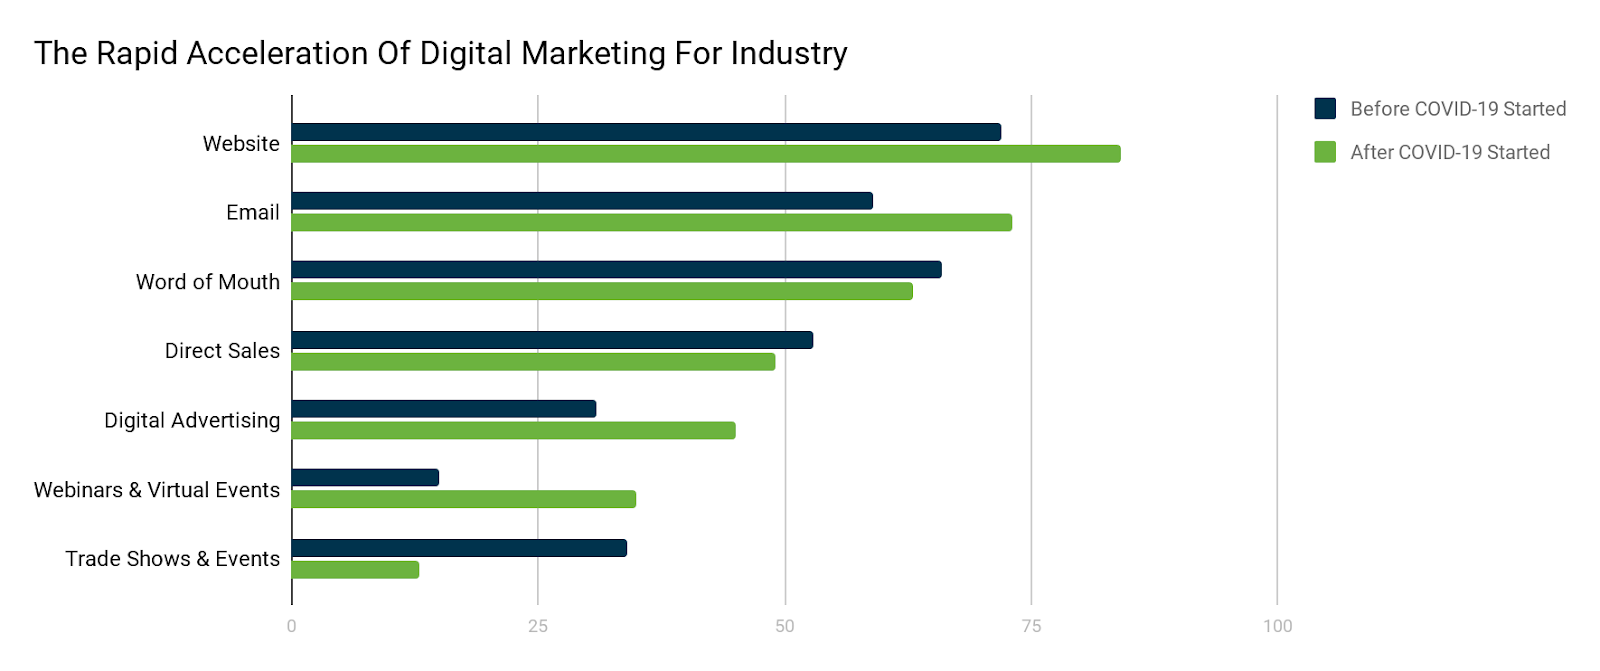 The Rapid Acceleration Of Digital Marketing For Industry